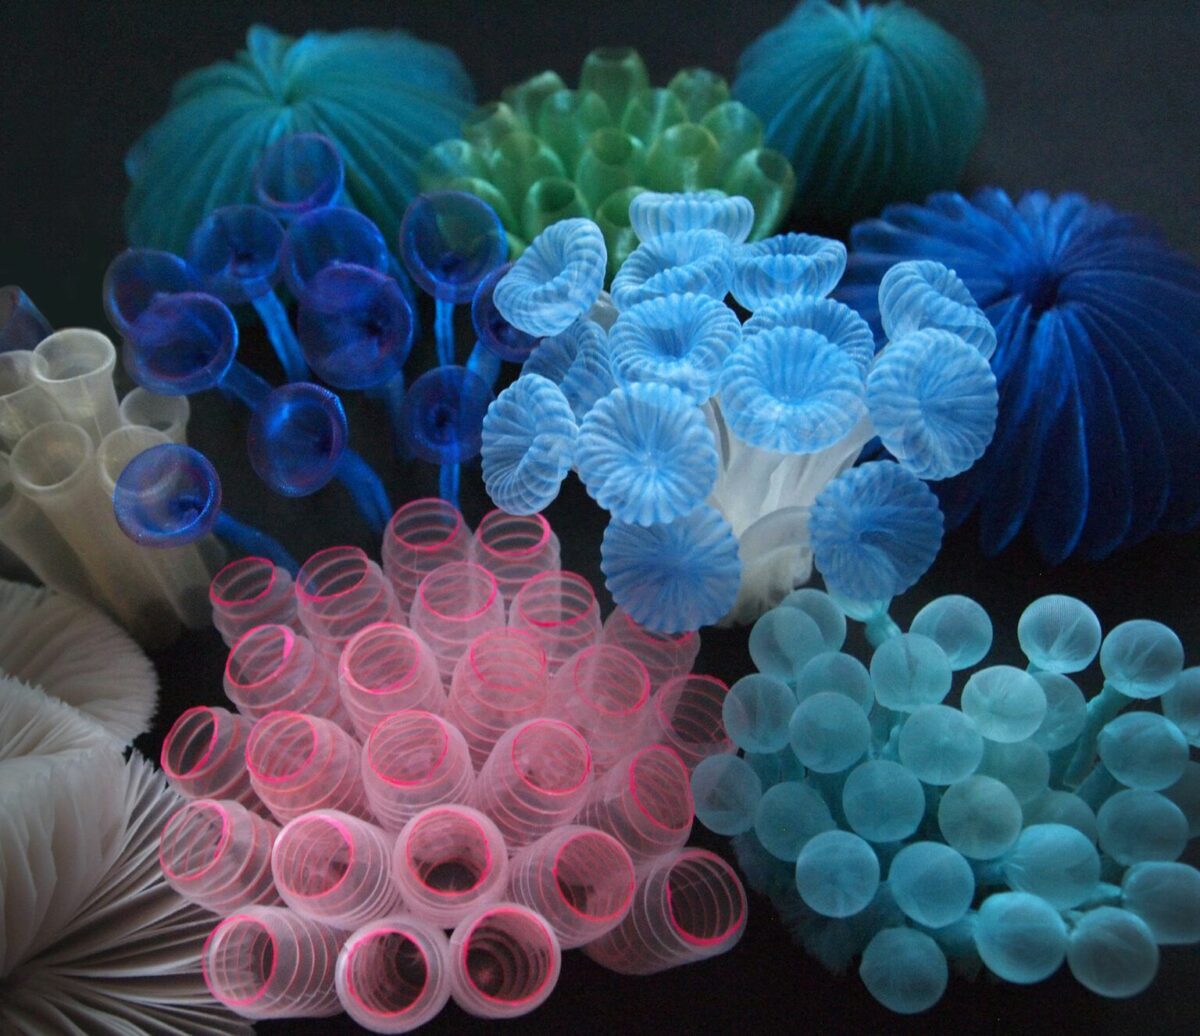 Absolutely Stunning Translucent Textile Sculptures In The Shape Of Organisms And Common Objects By Mariko Kusumoto 3